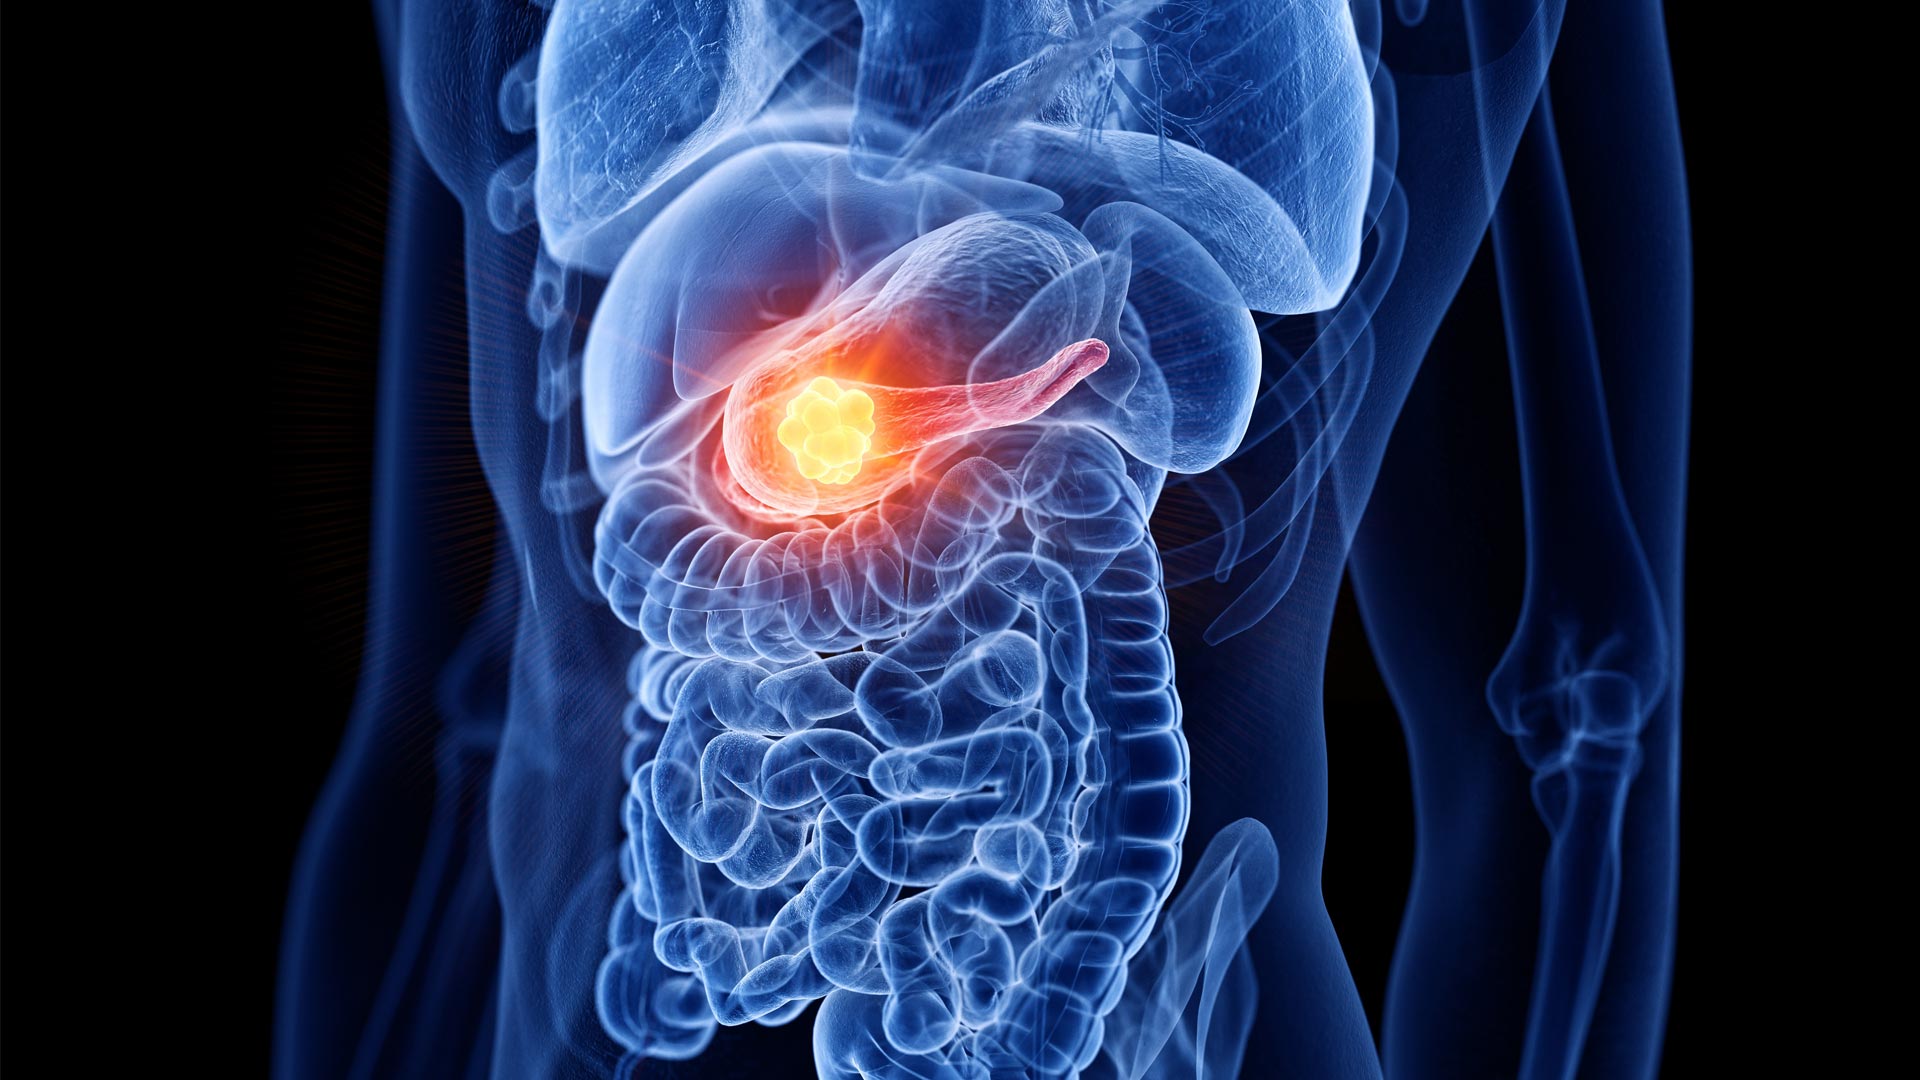 A New Approach to Treating Pancreatic Cancer